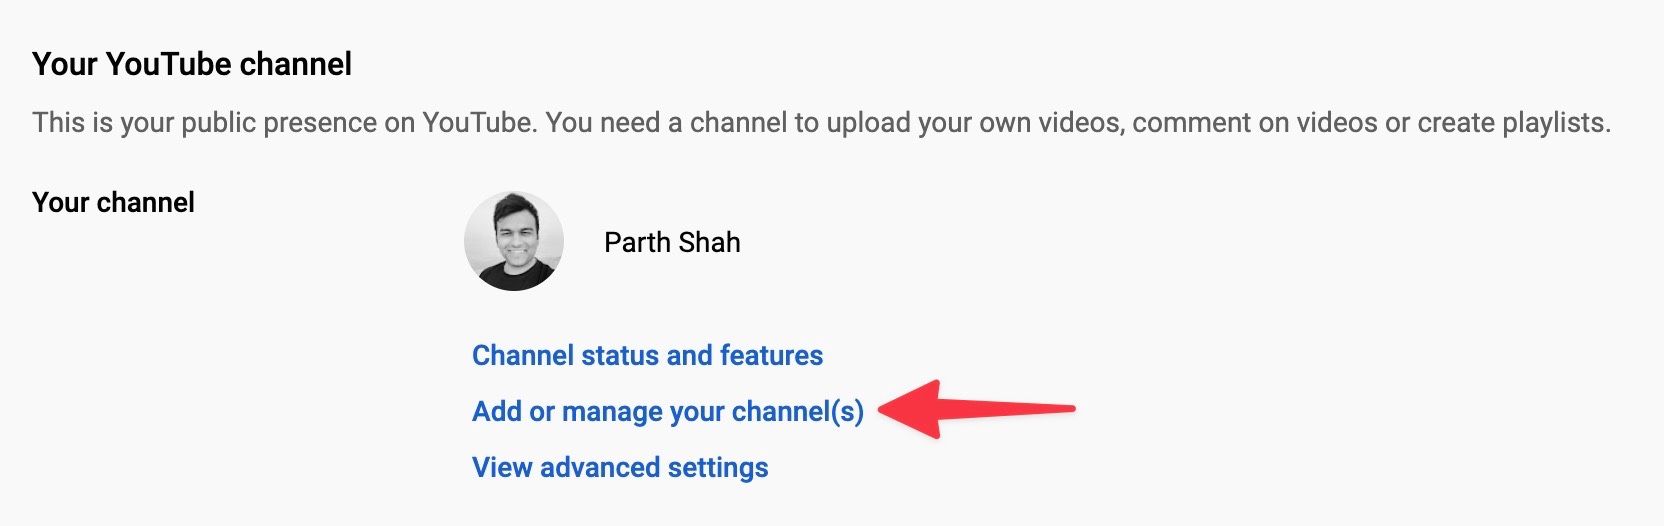 add-manage-channels